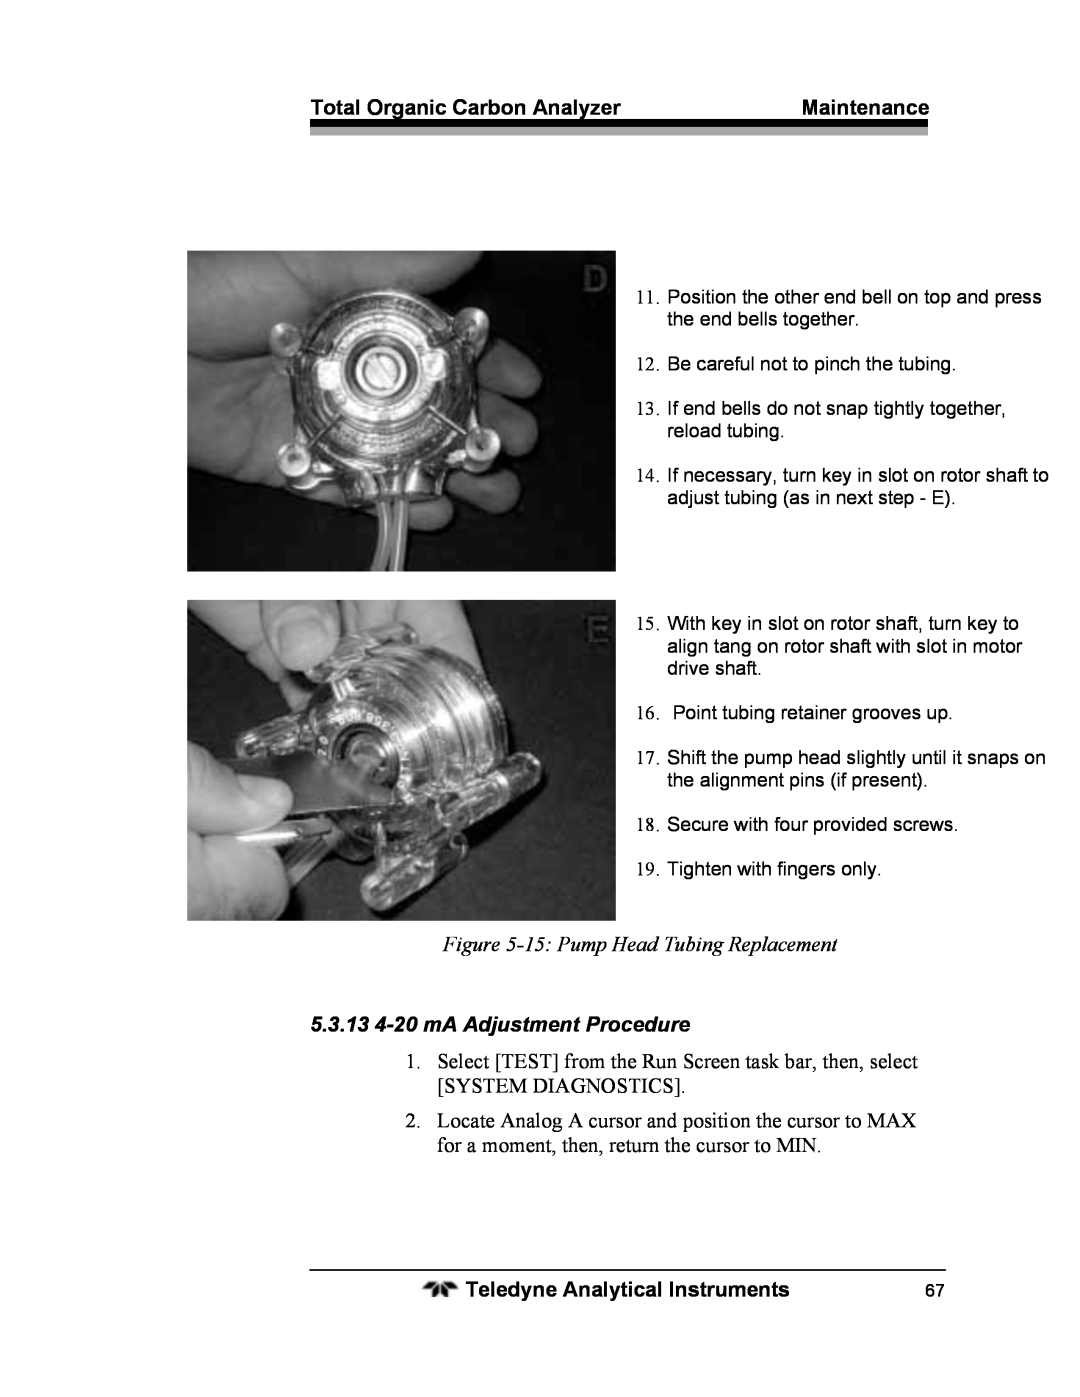 Teledyne 6750 operating instructions 15:Pump Head Tubing Replacement, 5.3.134-20mA Adjustment Procedure 